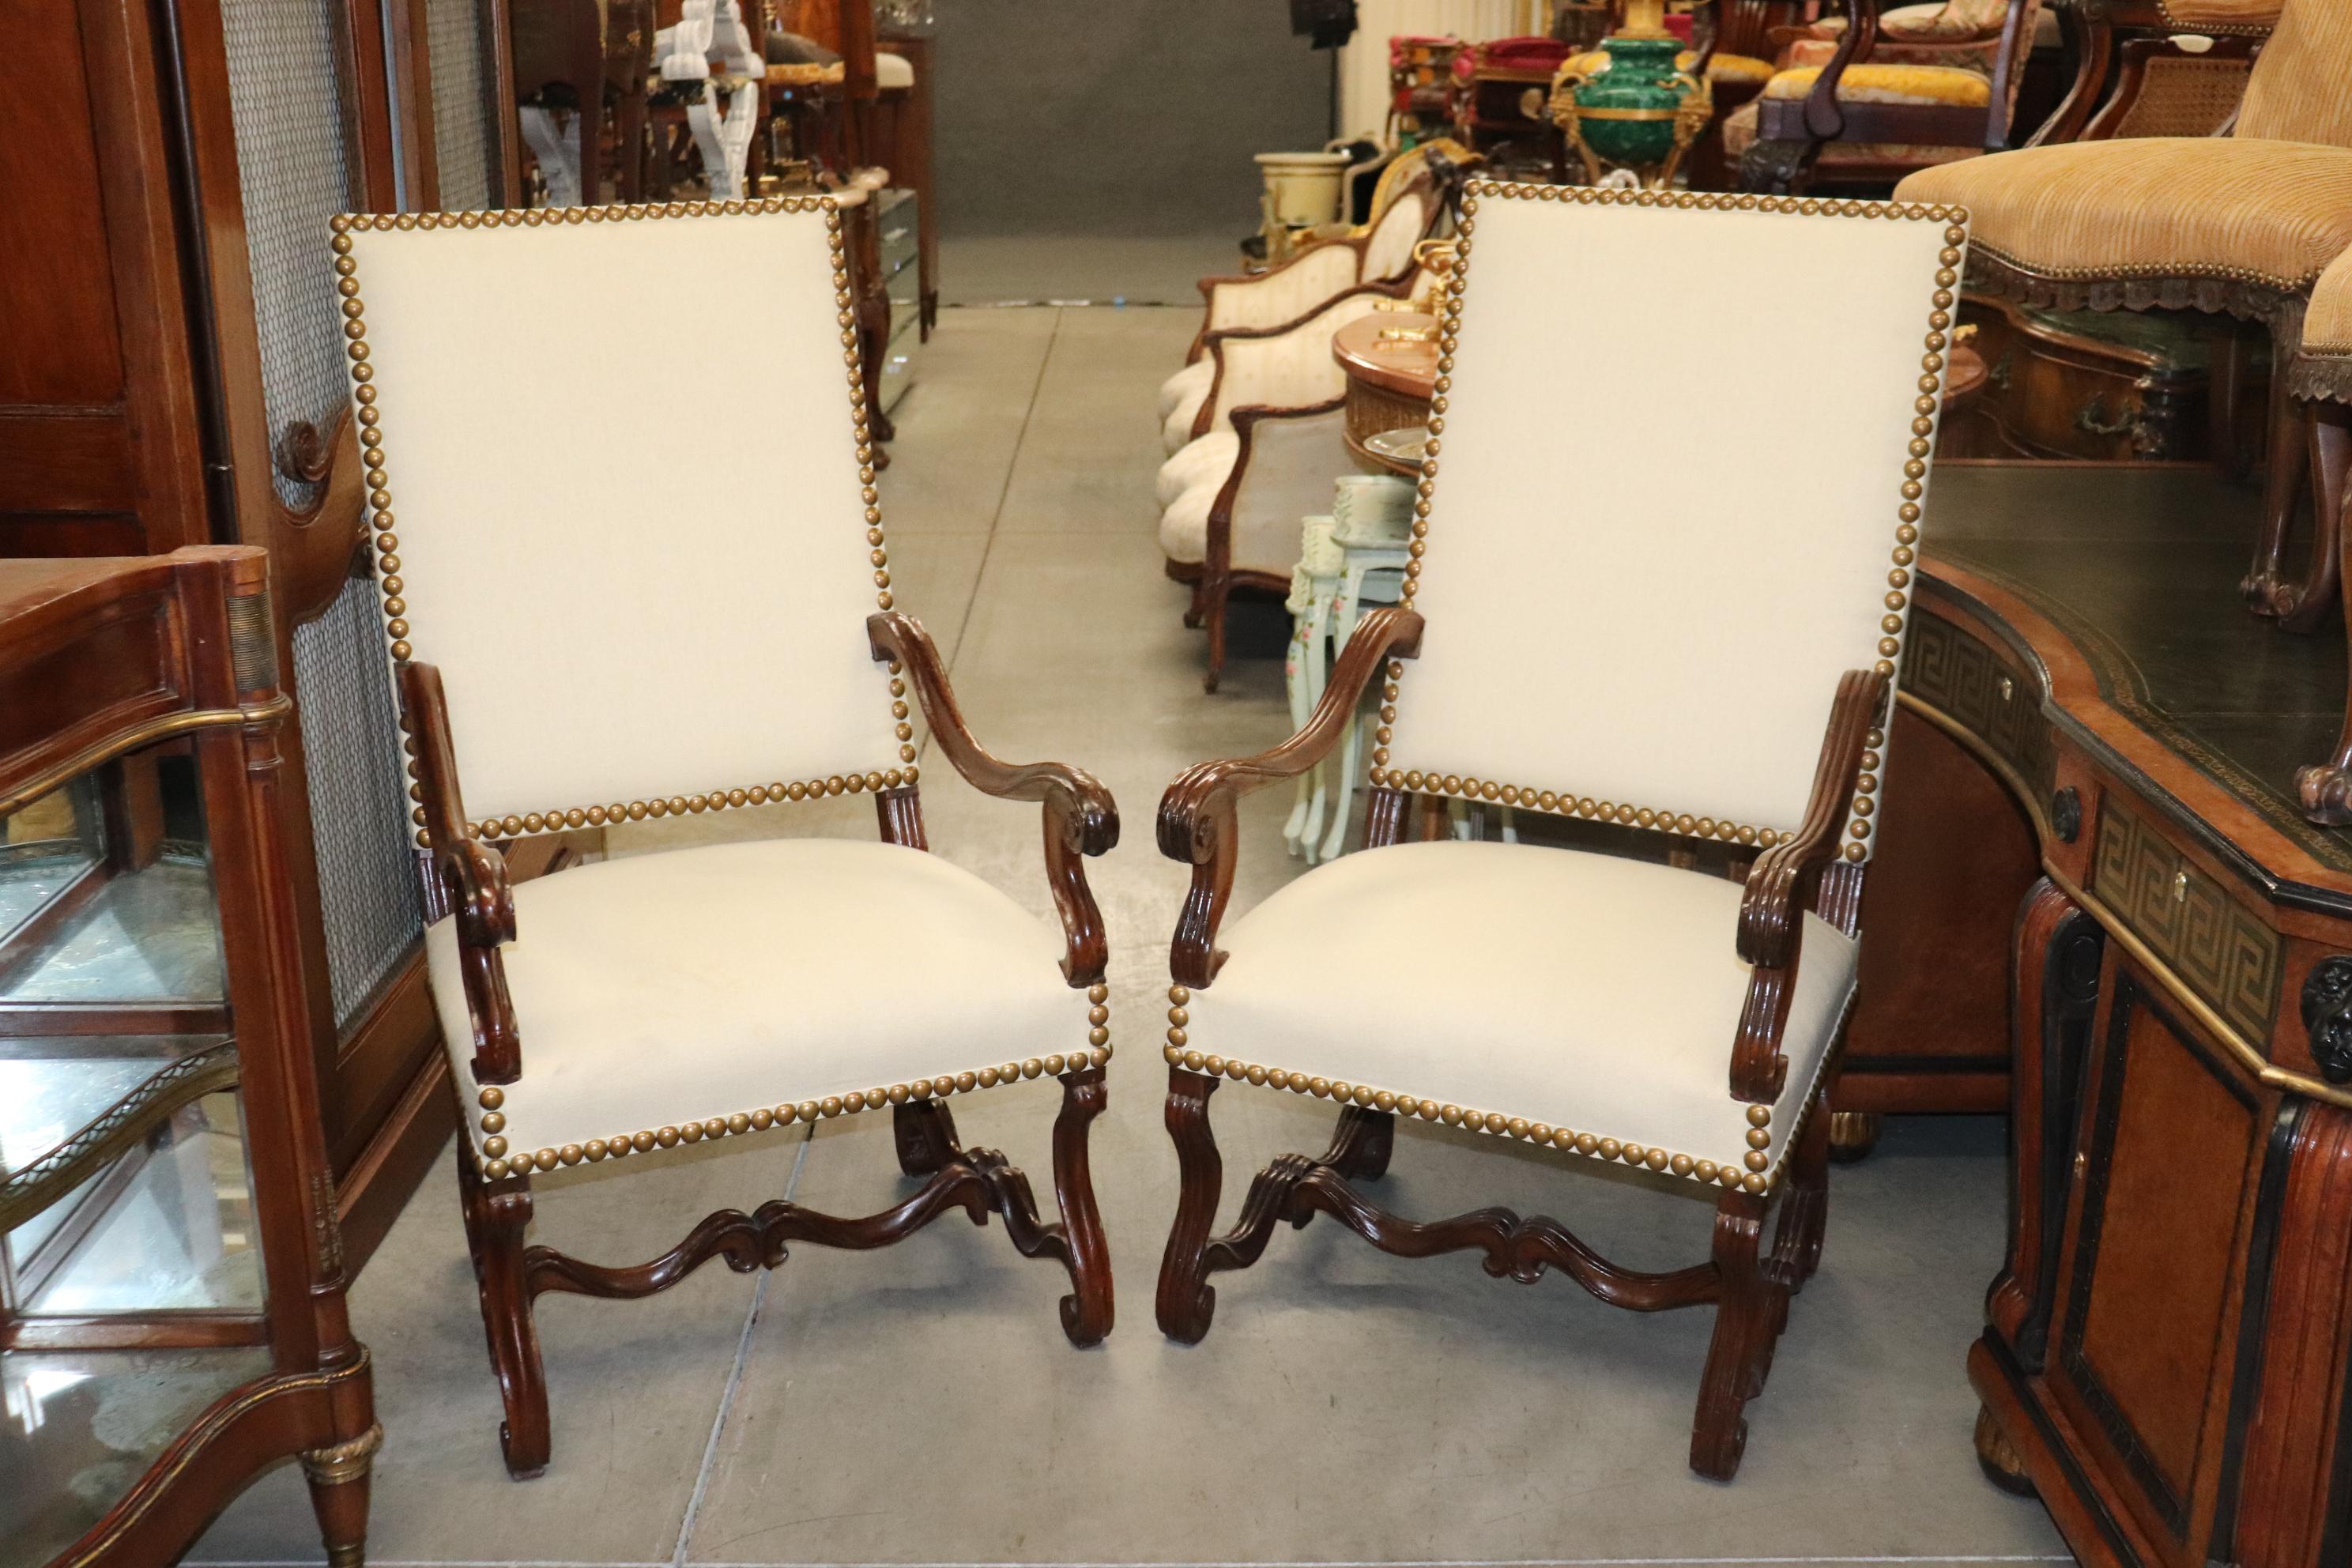 This is a gorgeous pair of almost matching mutton leg armchairs. They are slightly different but if place far enough apart no one will be able to tell the difference. They date to the 1920s era and are in good condition with huge brass nailhead trim